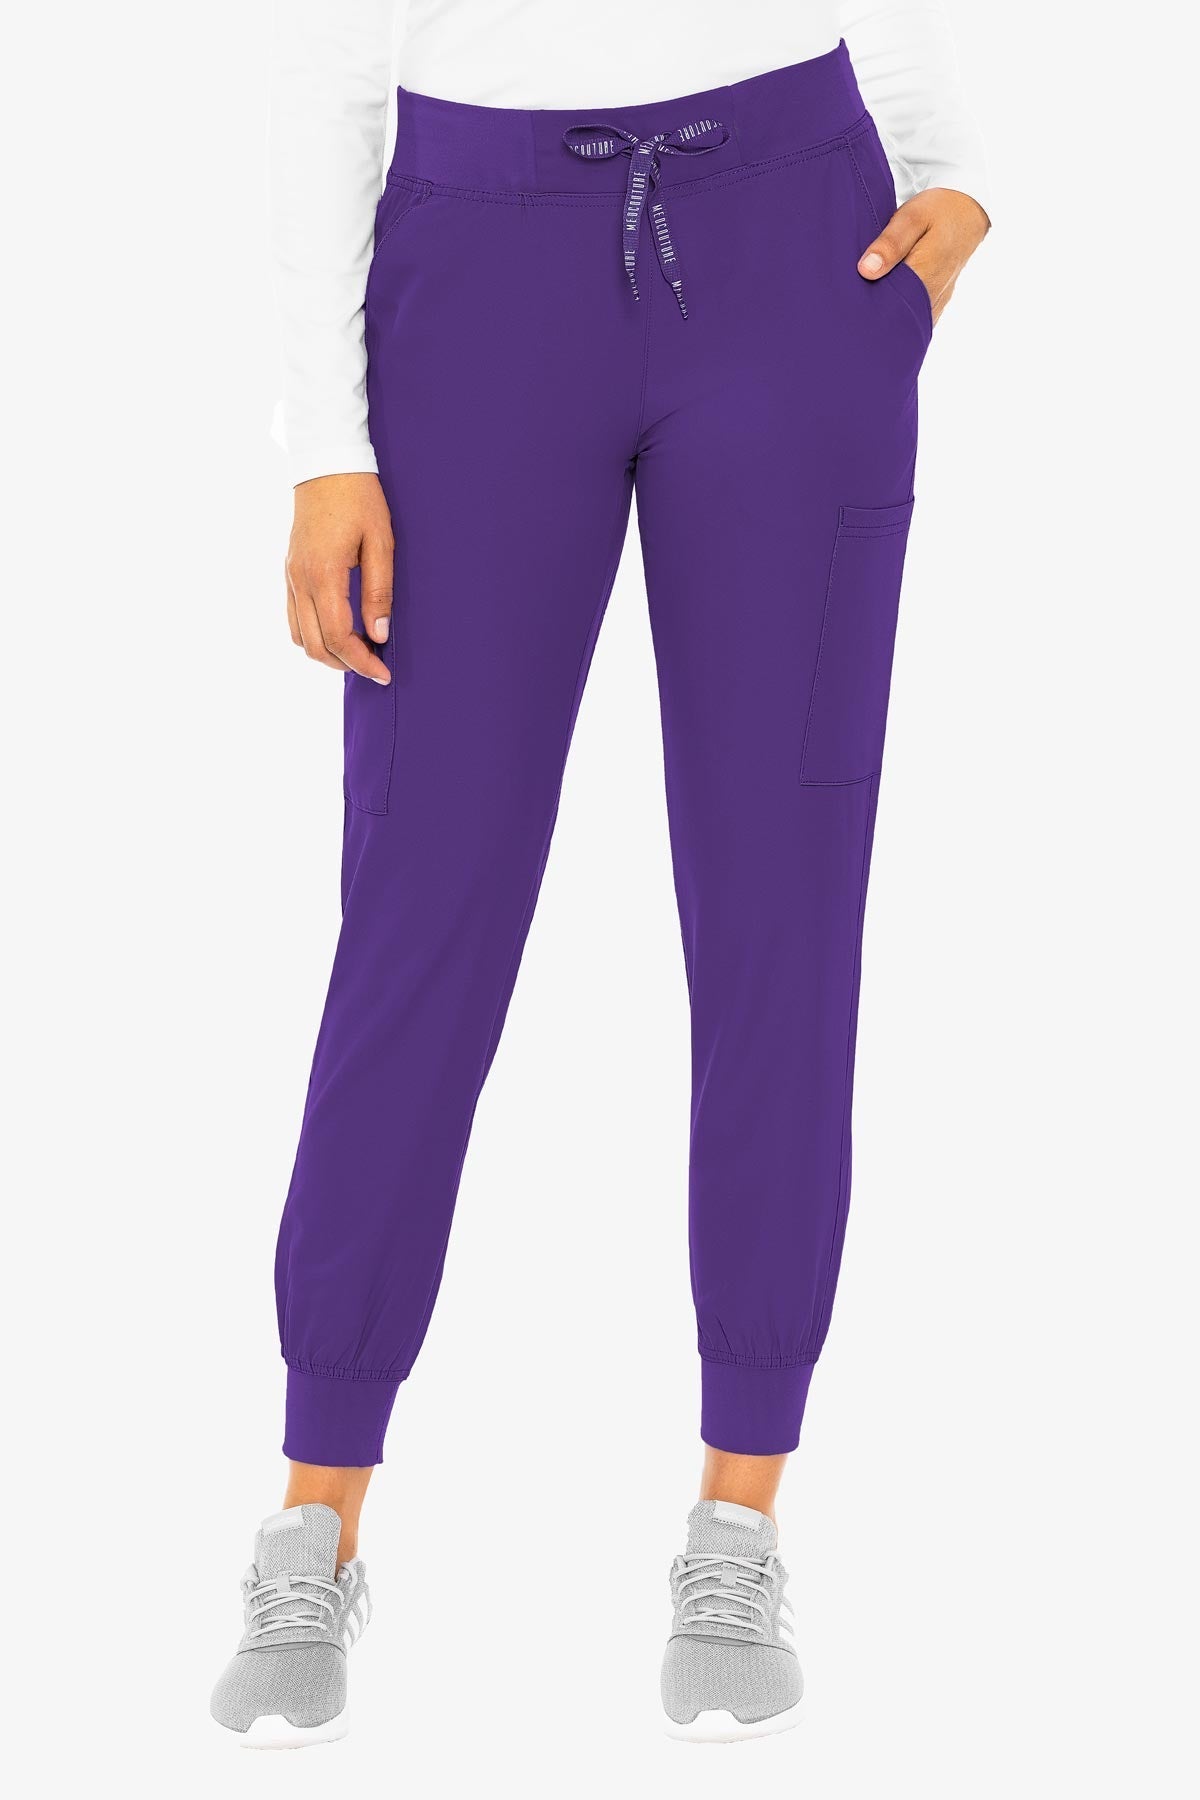 Med Couture 2711 Insight Jogger - Grape